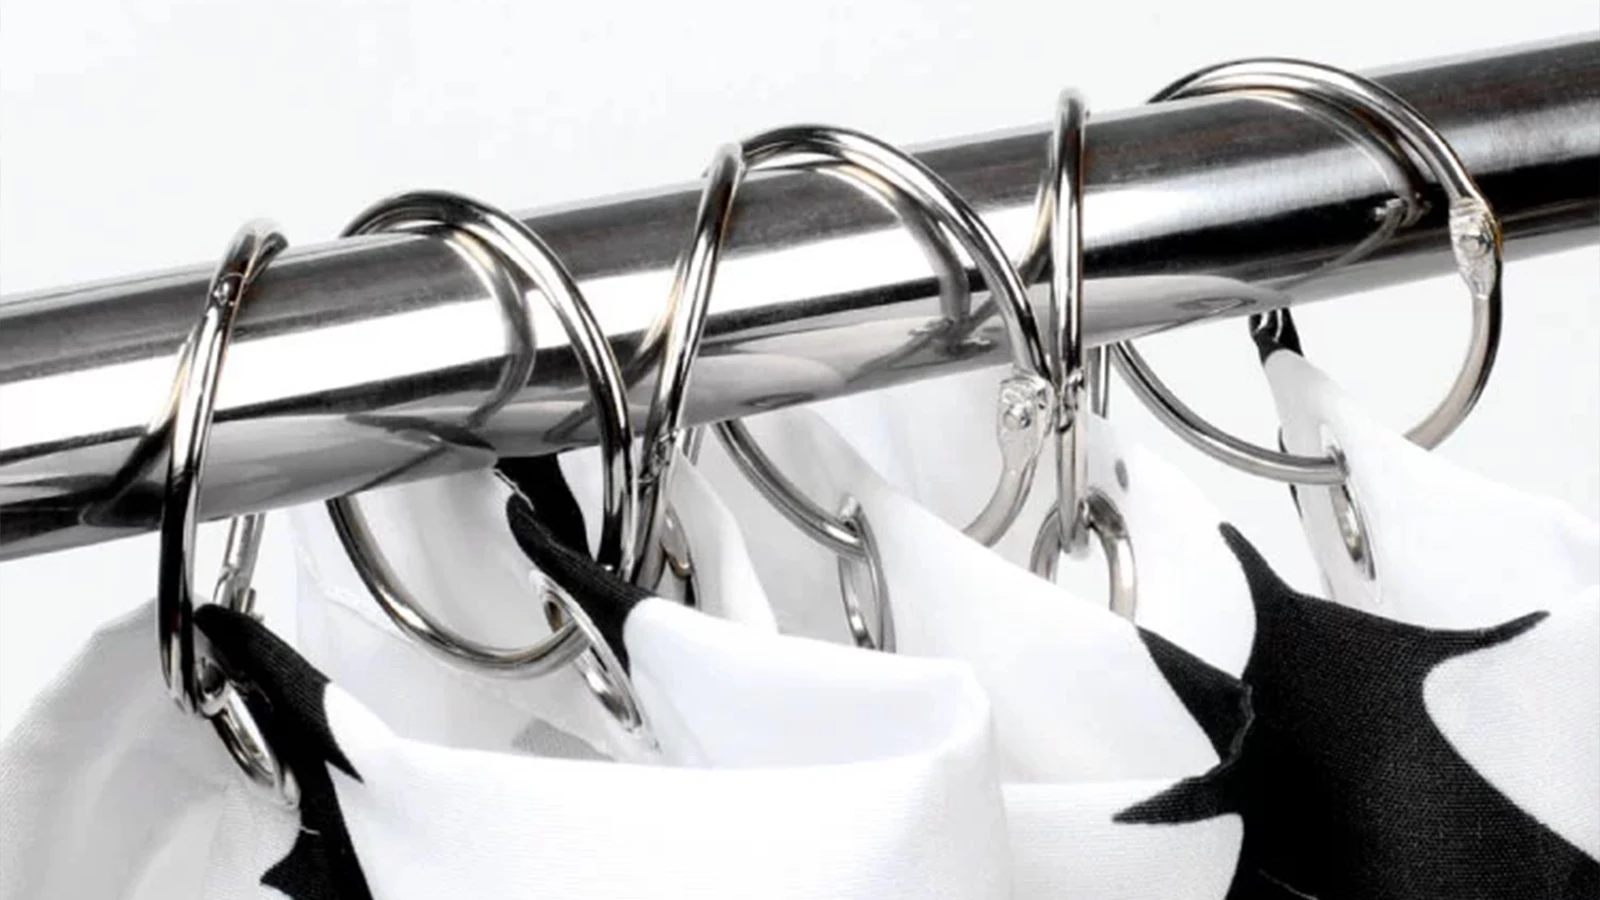 Types of Shower Curtain Hooks: A black and white shower curtain hangs on a metal rod.